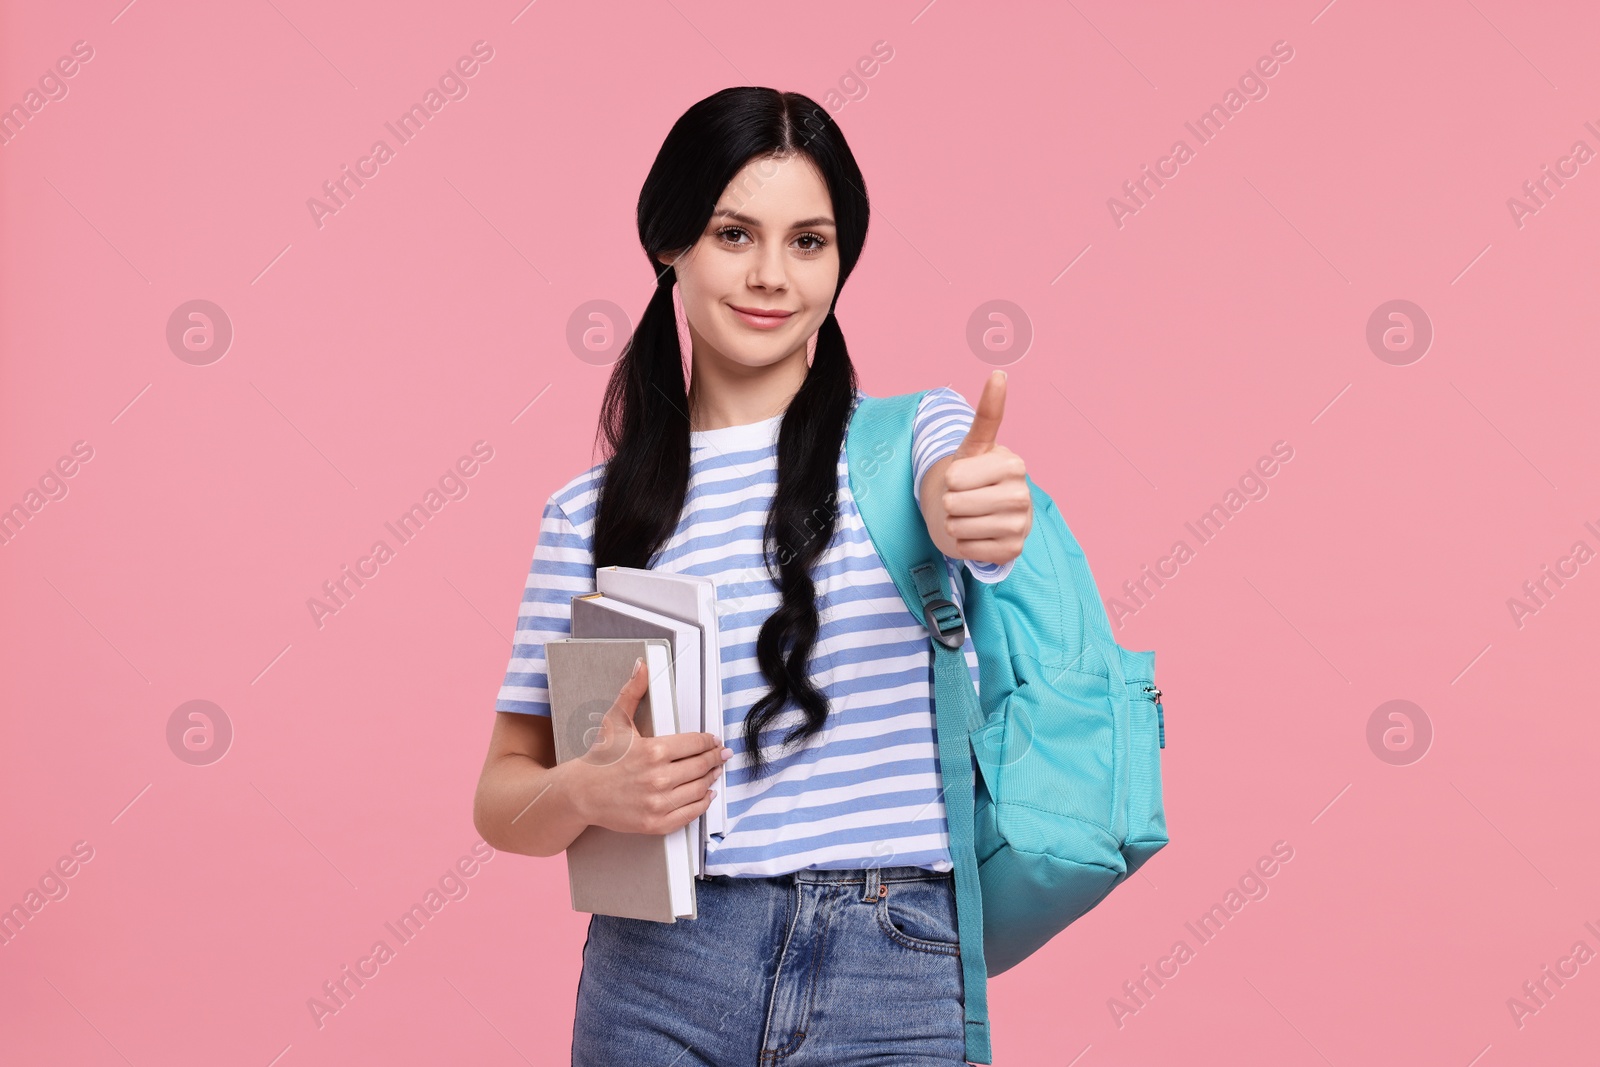 Photo of Student with books and backpack showing thumb up on pink background